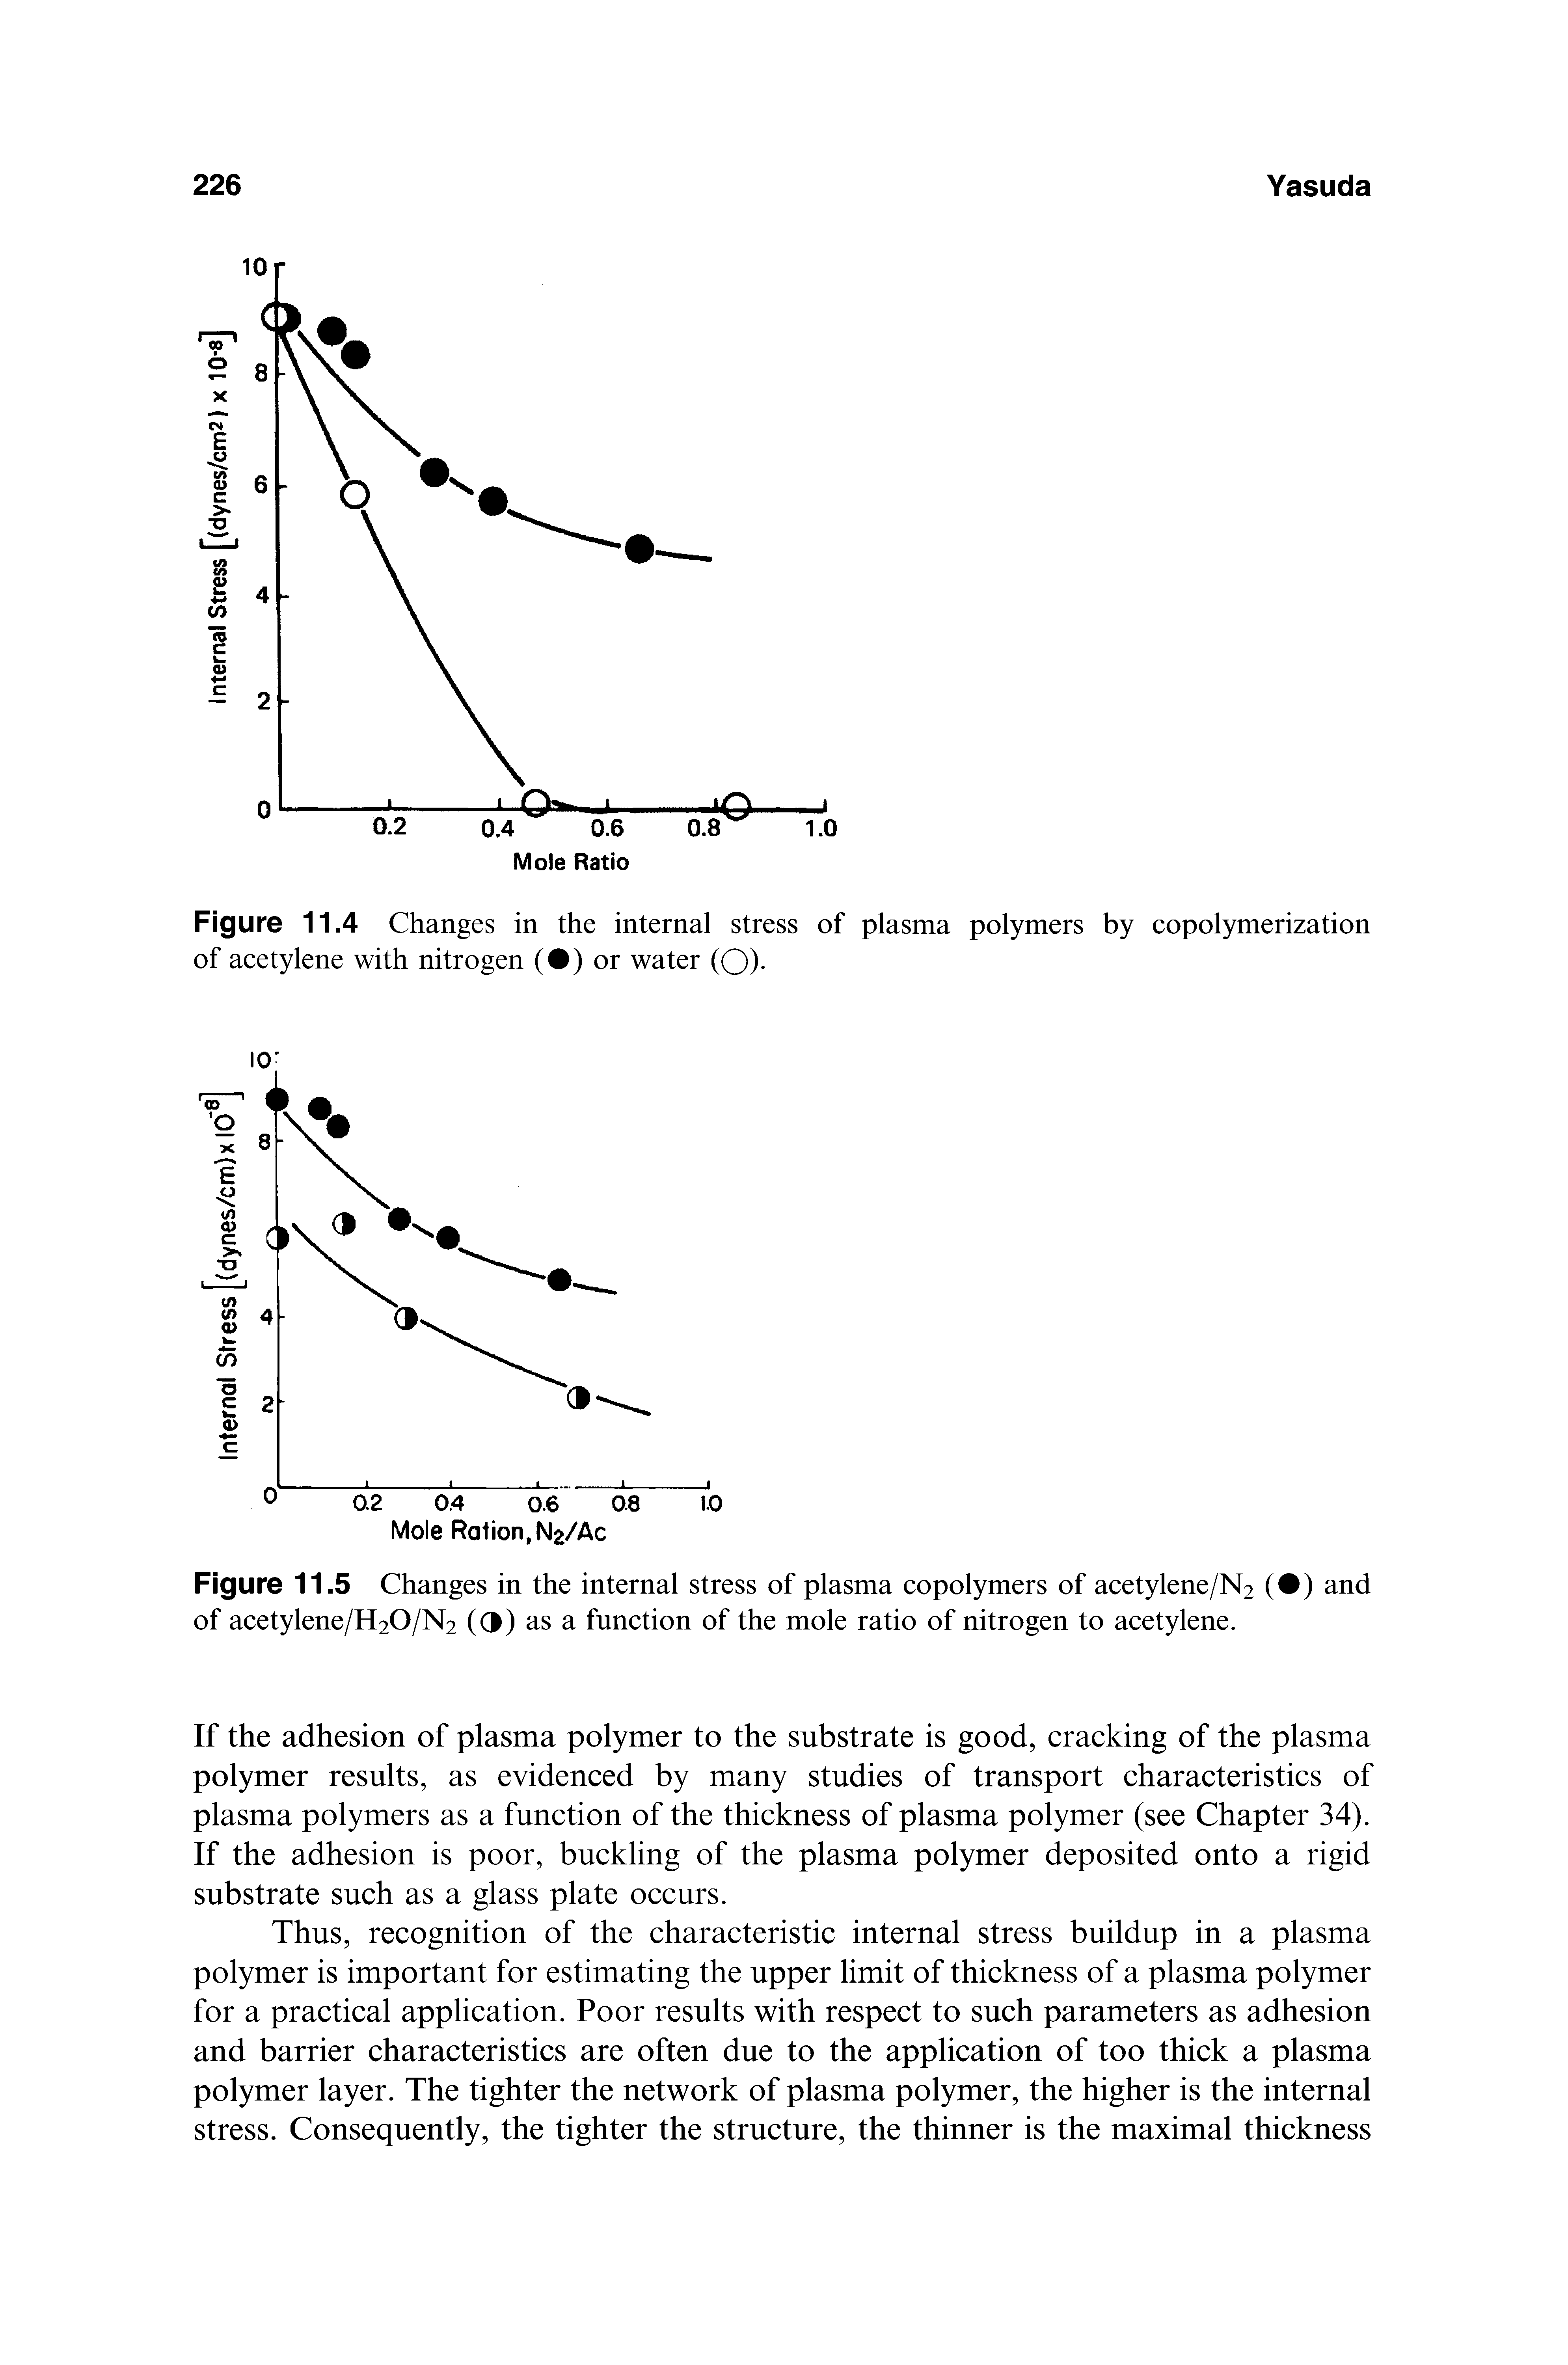 Figure 11.5 Changes in the internal stress of plasma copolymers of acetylene/N2 ( ) and of acetylene/H20/N2 (3) as a function of the mole ratio of nitrogen to acetylene.